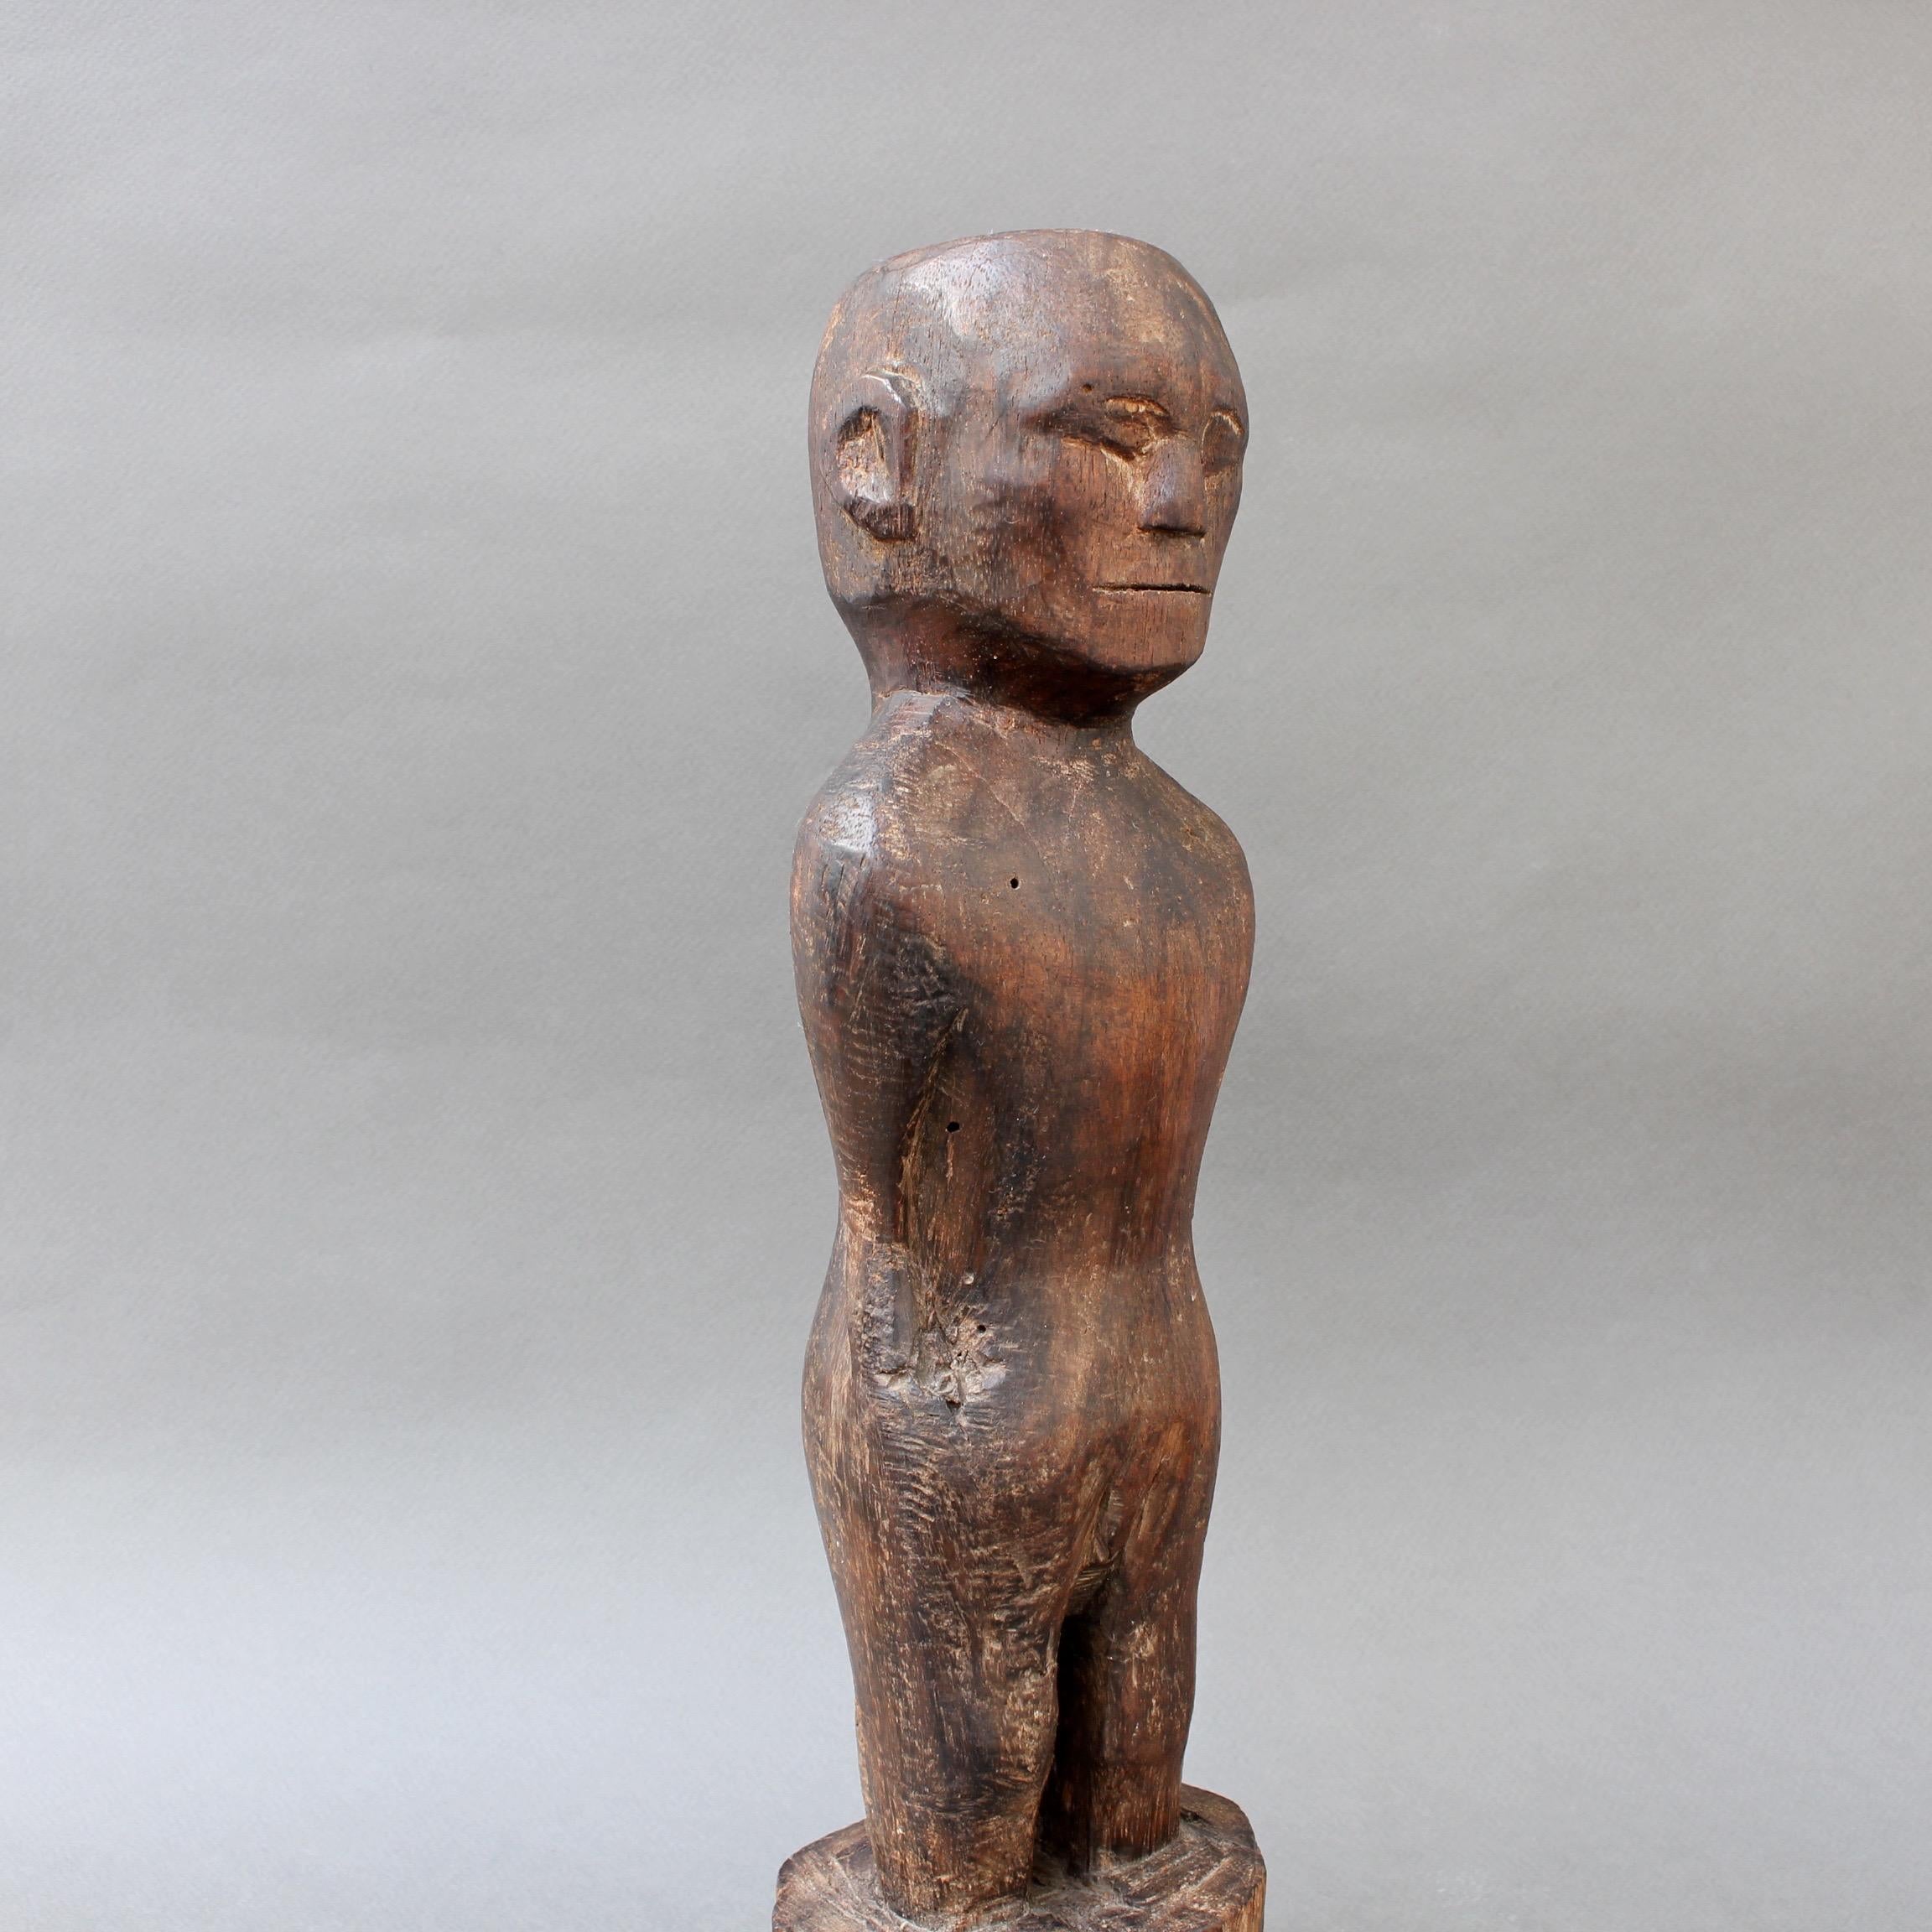 Wooden Carving or Sculpture of Standing Ancestral Figure from Timor, Indonesia 2